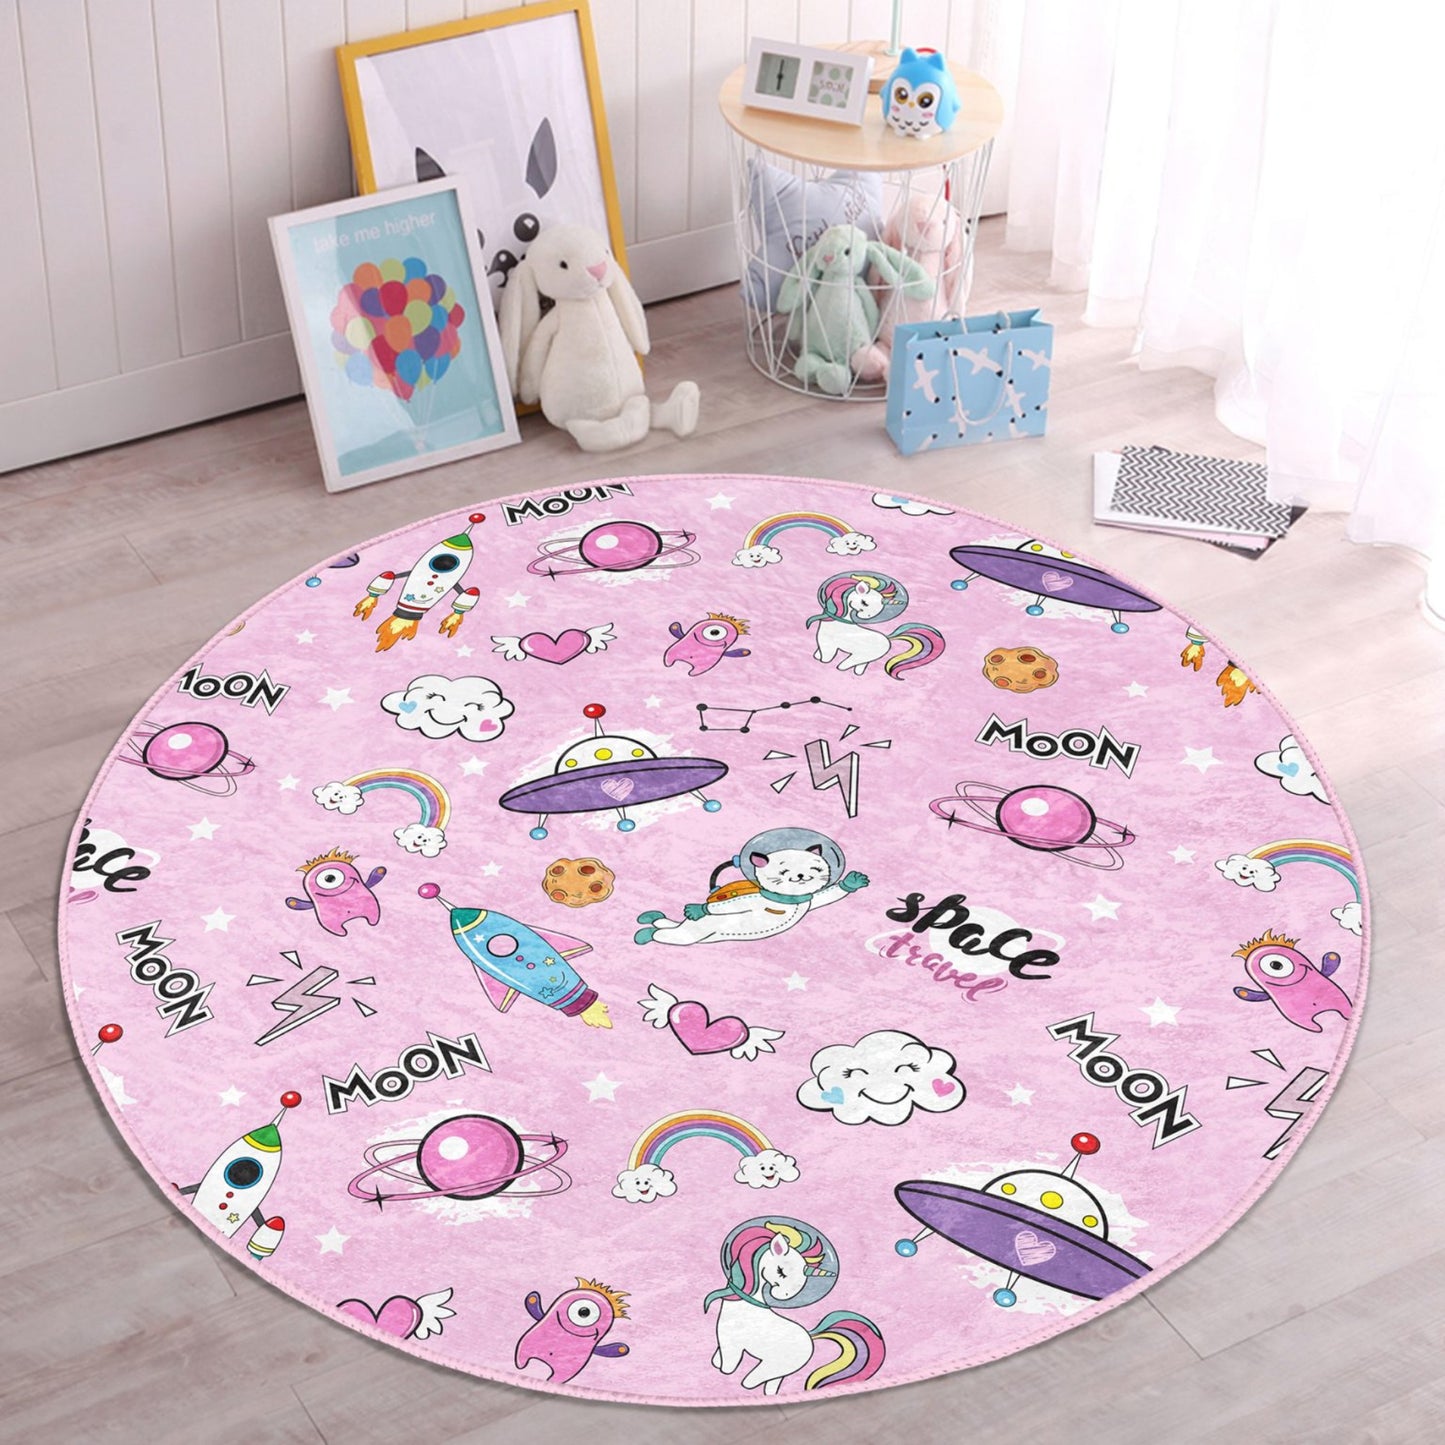 Rug with Whimsical Cat Astronaut Illustrations